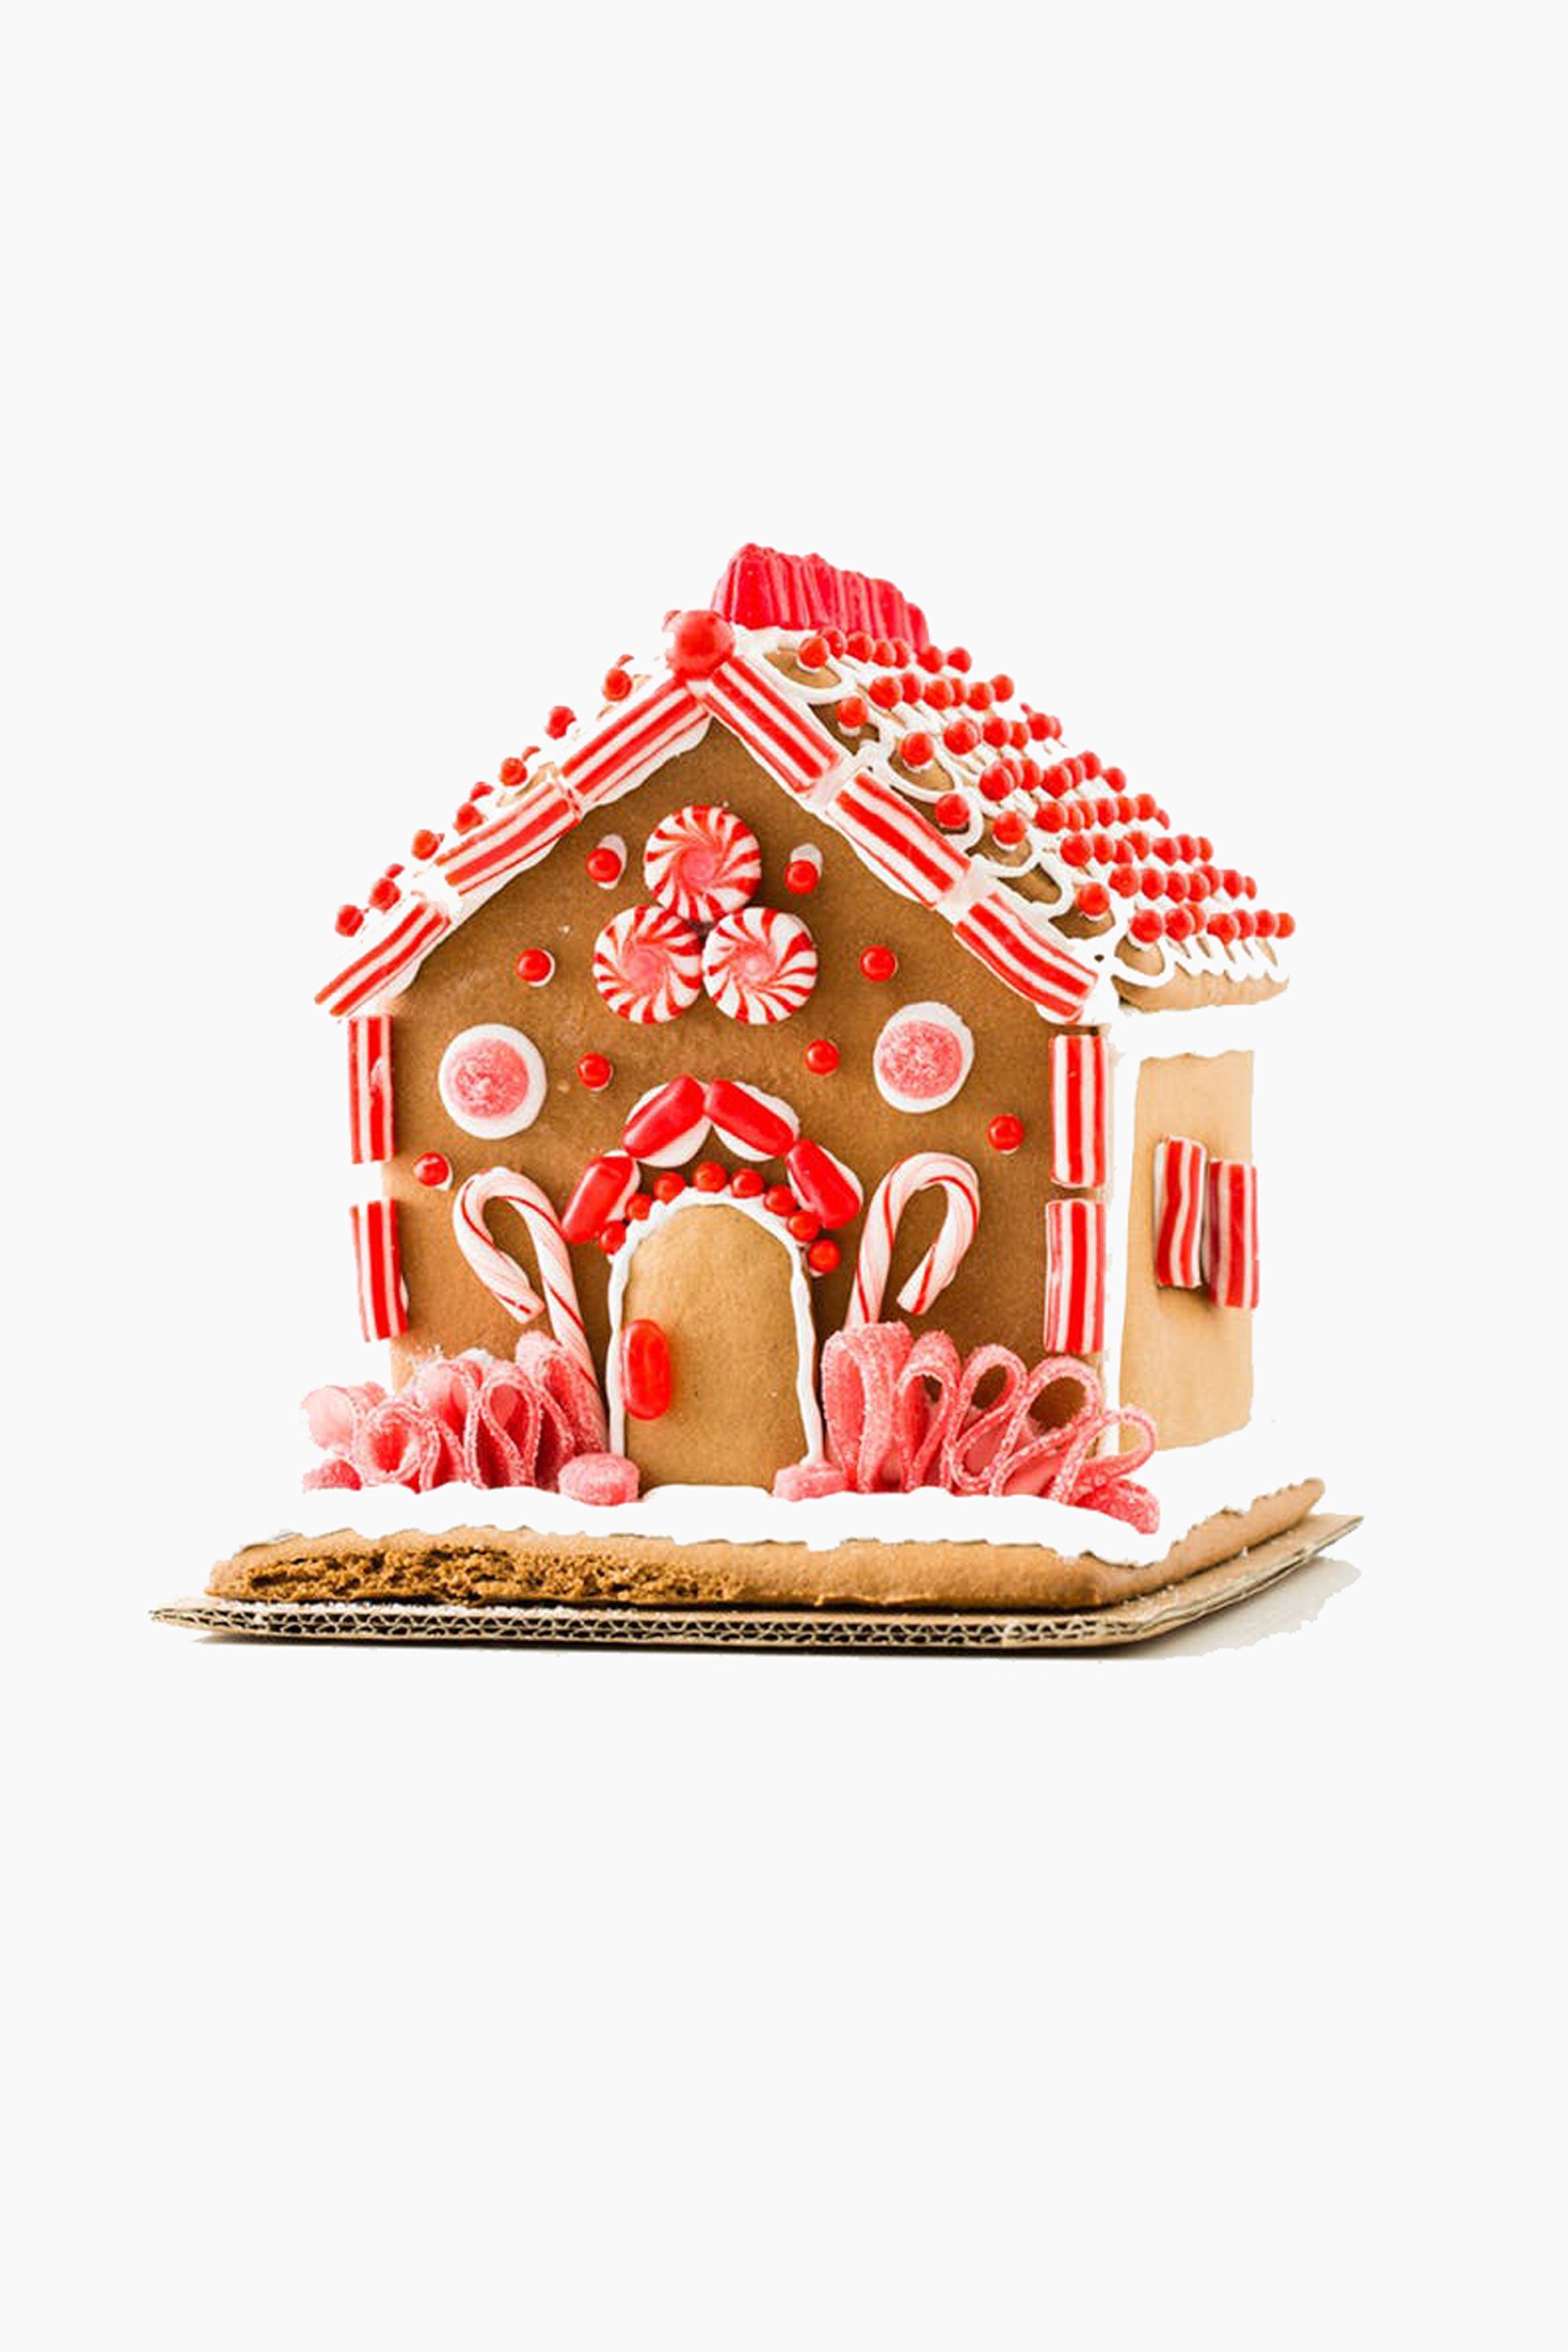 Candy Cane Gingerbread House -   Cristmass Gingerbread and Pretzel Houses Ideas